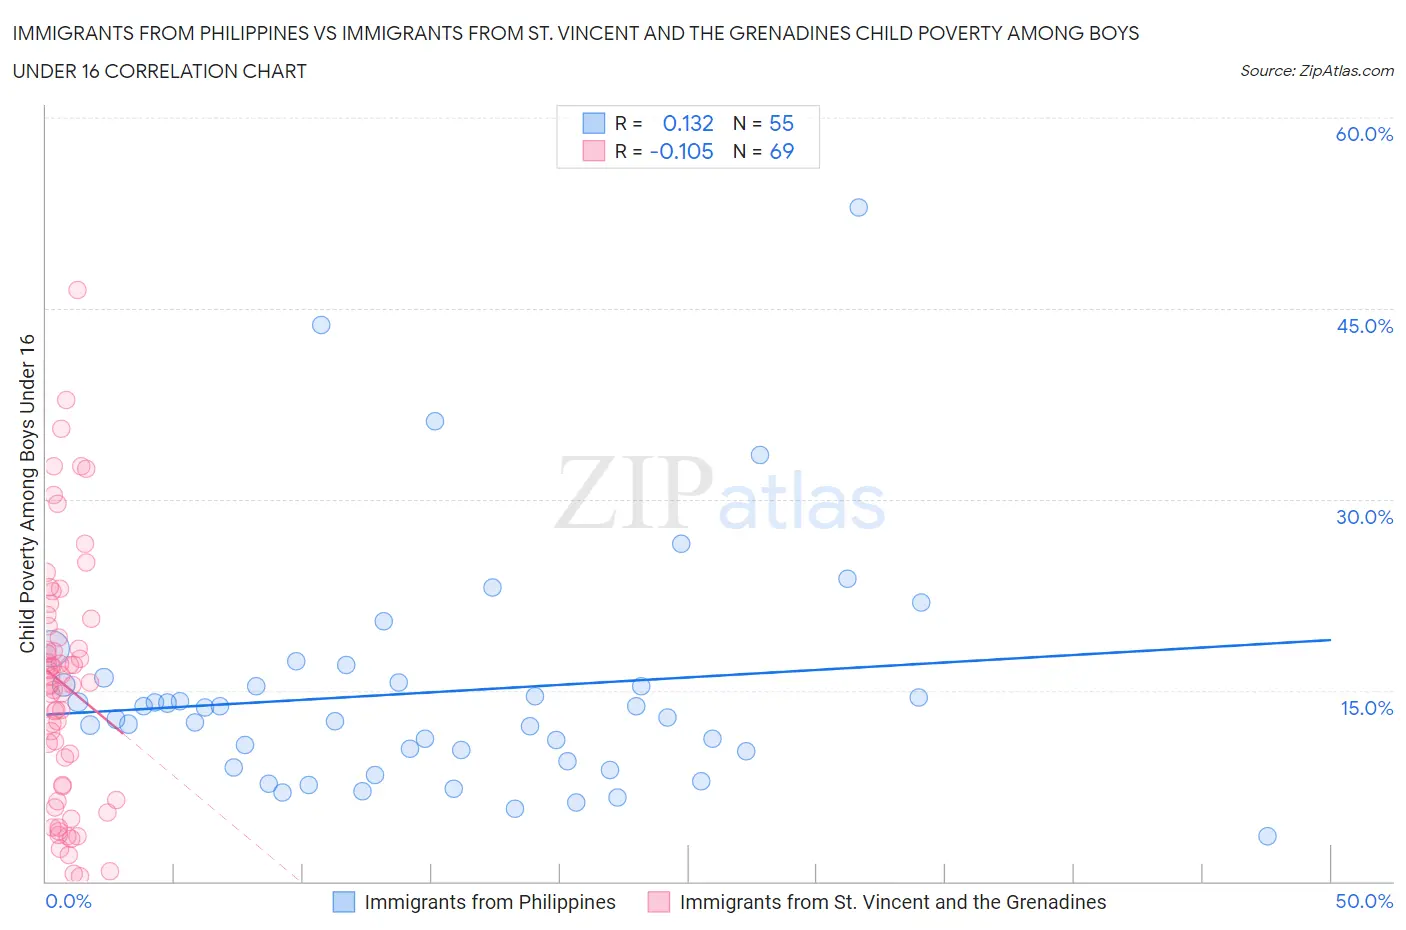 Immigrants from Philippines vs Immigrants from St. Vincent and the Grenadines Child Poverty Among Boys Under 16